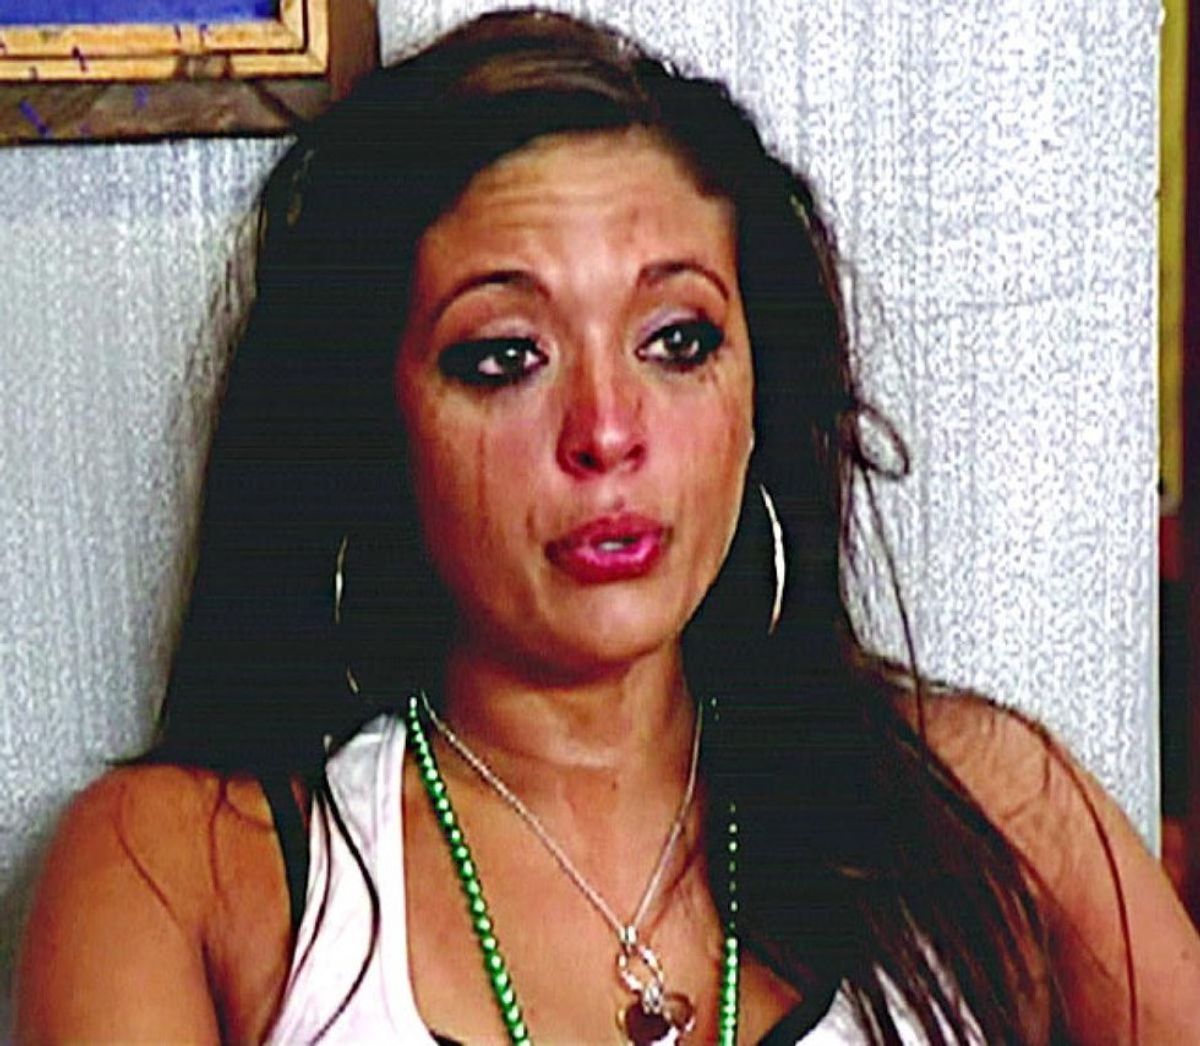 The Struggles of Class Registration (As Told By The Cast Of Jersey Shore)